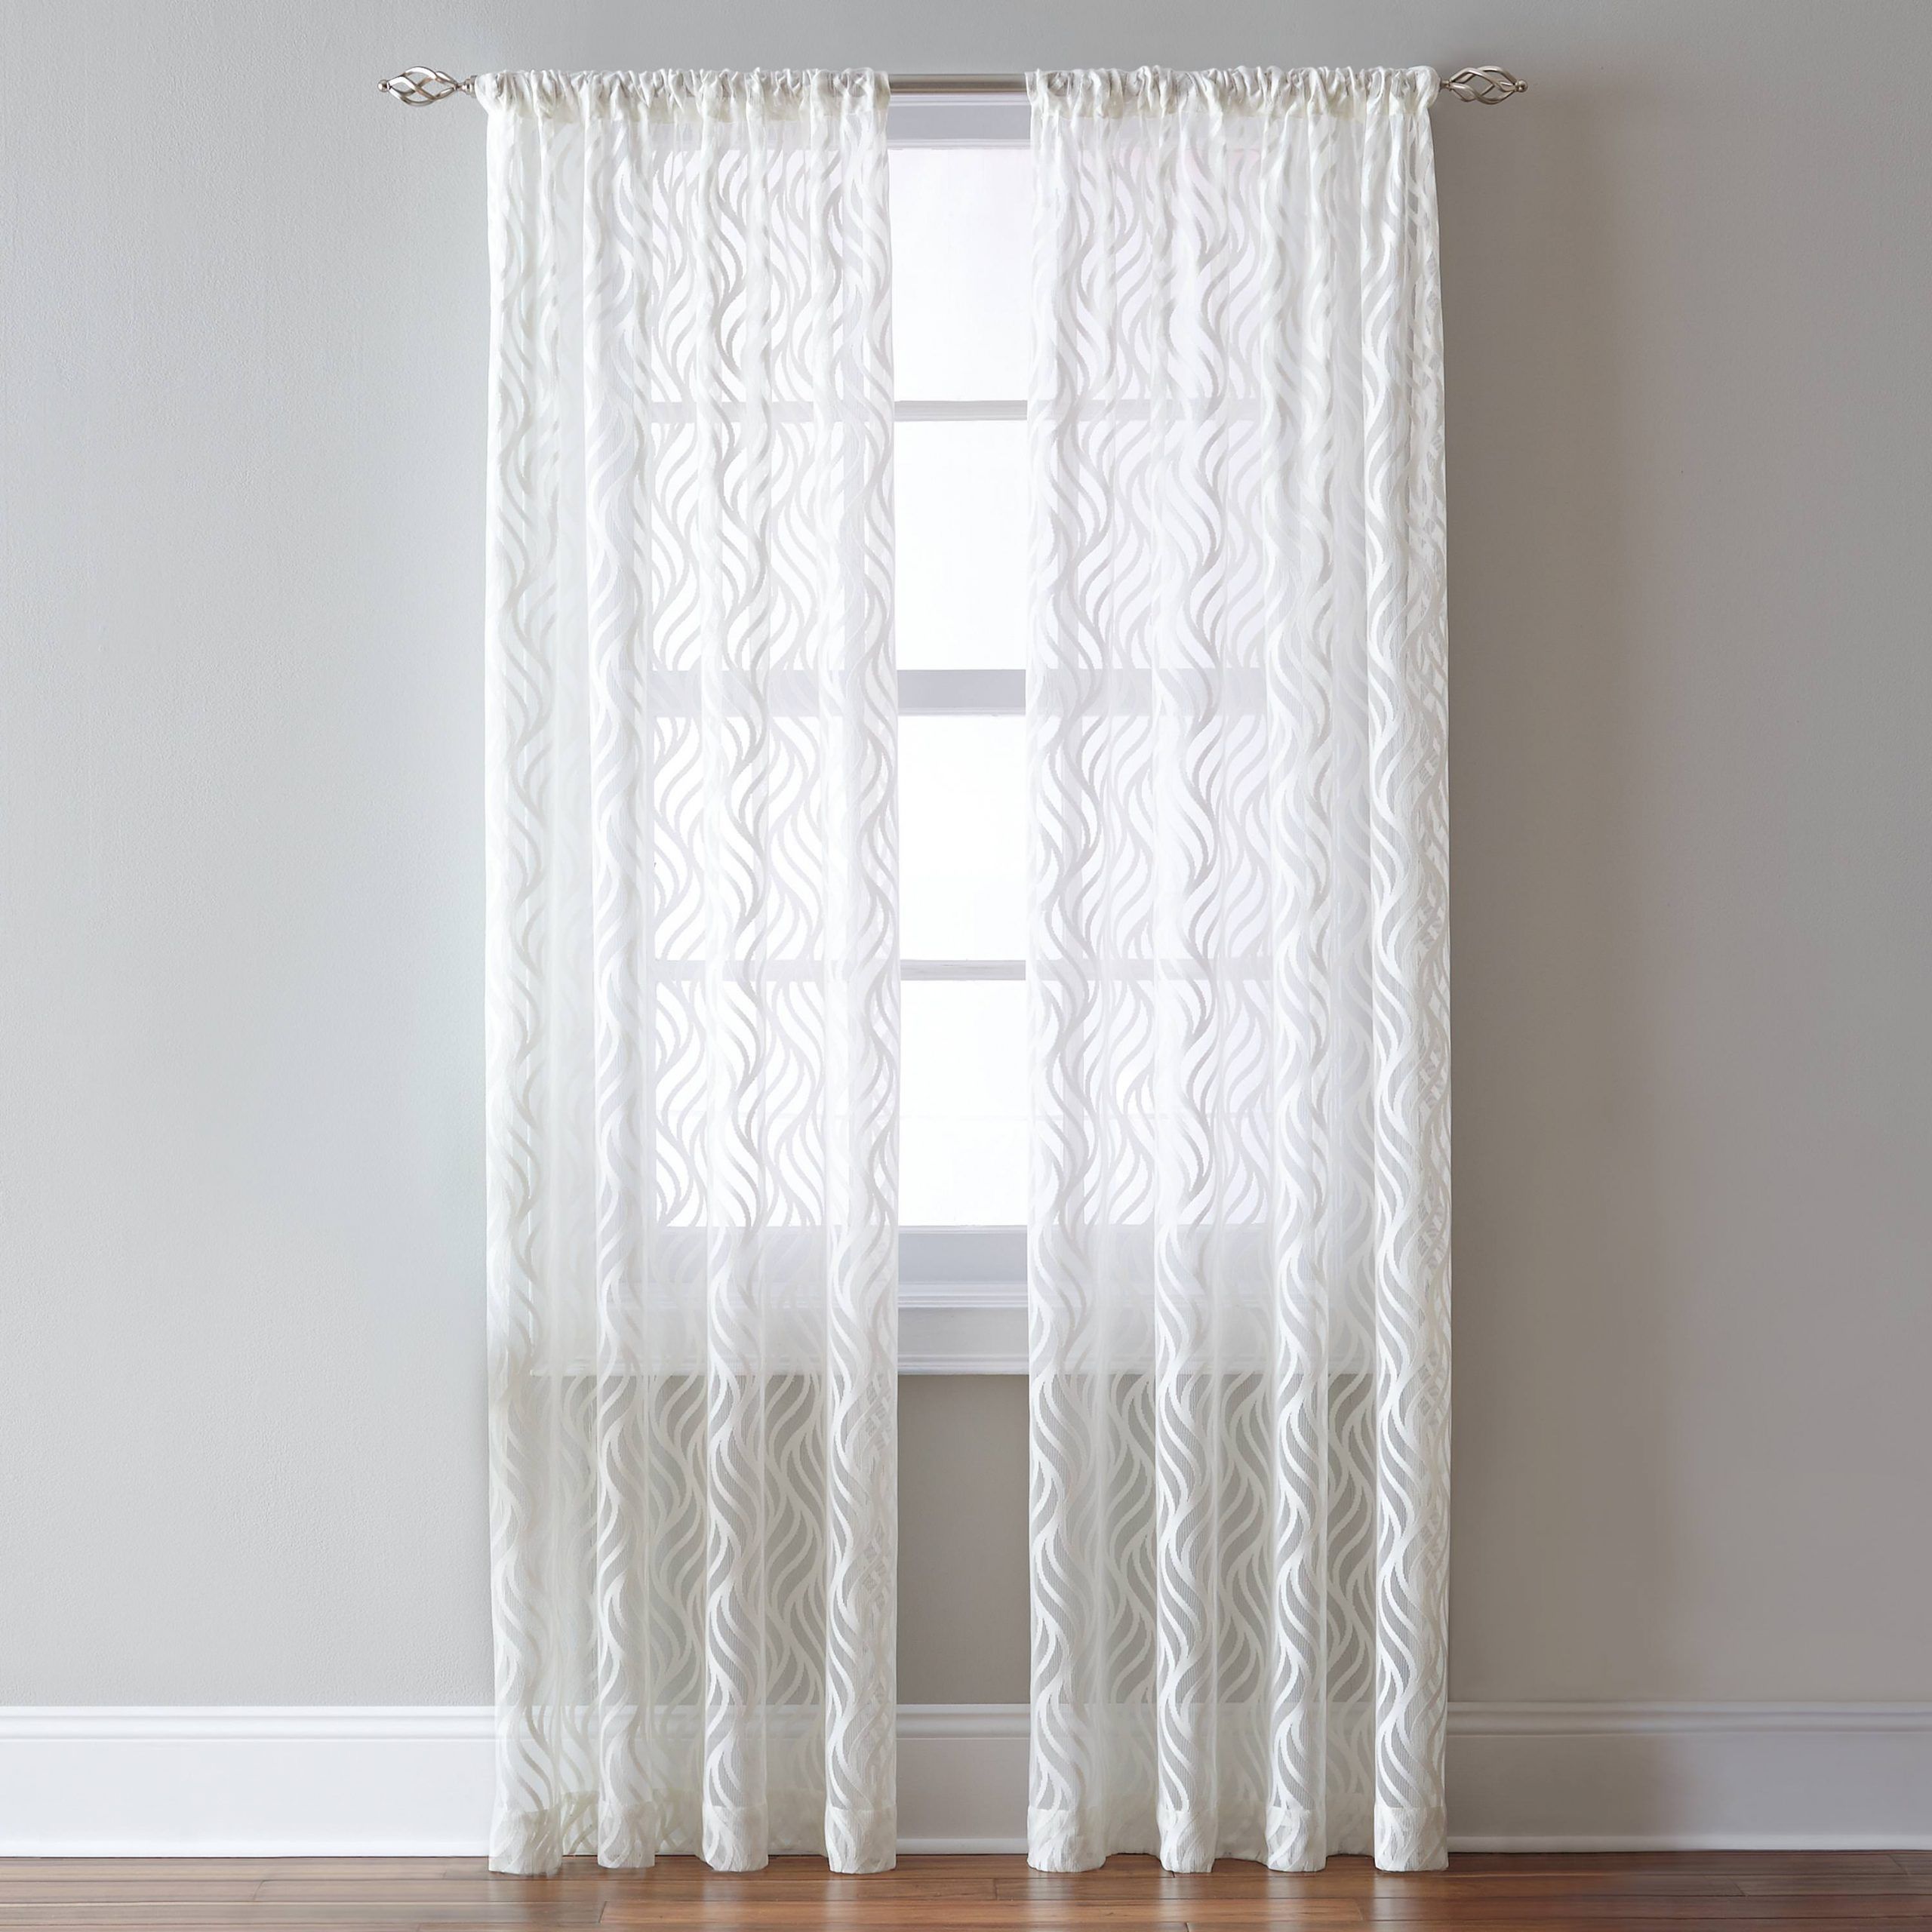 Kida Embroidered Sheer Curtain Panels Throughout Most Popular Lyric Rod Pocket Sheer Curtain Panel (View 18 of 20)